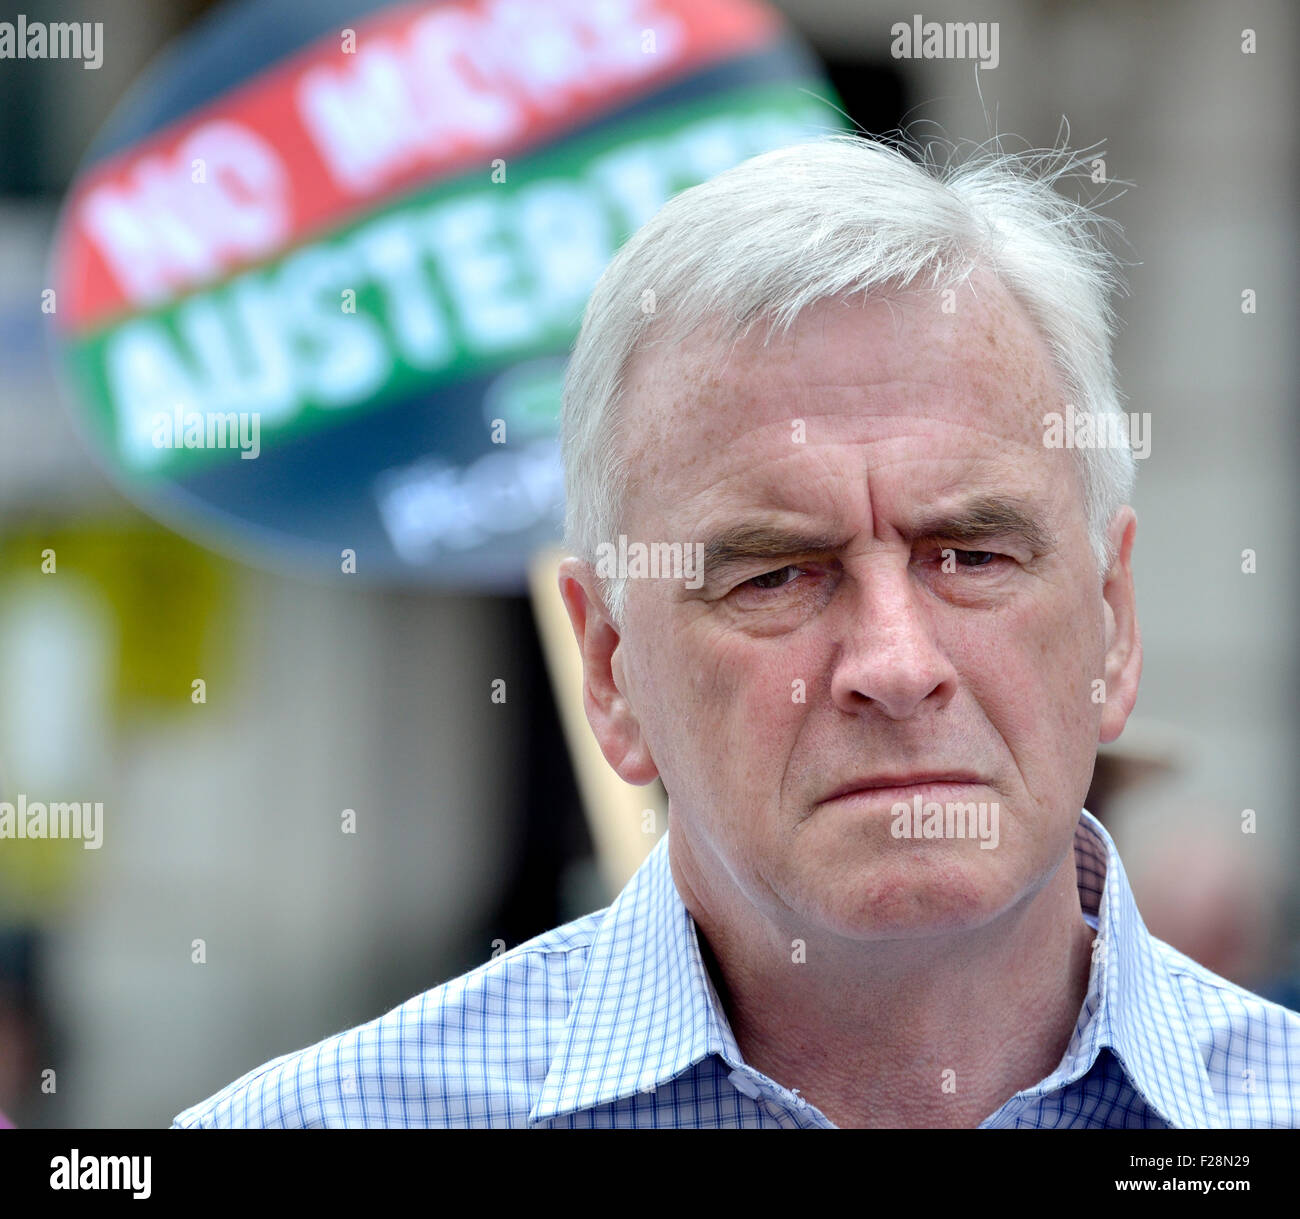 John McDonnell MP (Labour: Hayes and Harlington) speaking in Portland Place against Austerity, 21 June 2014. Shadow Chancellor Stock Photo